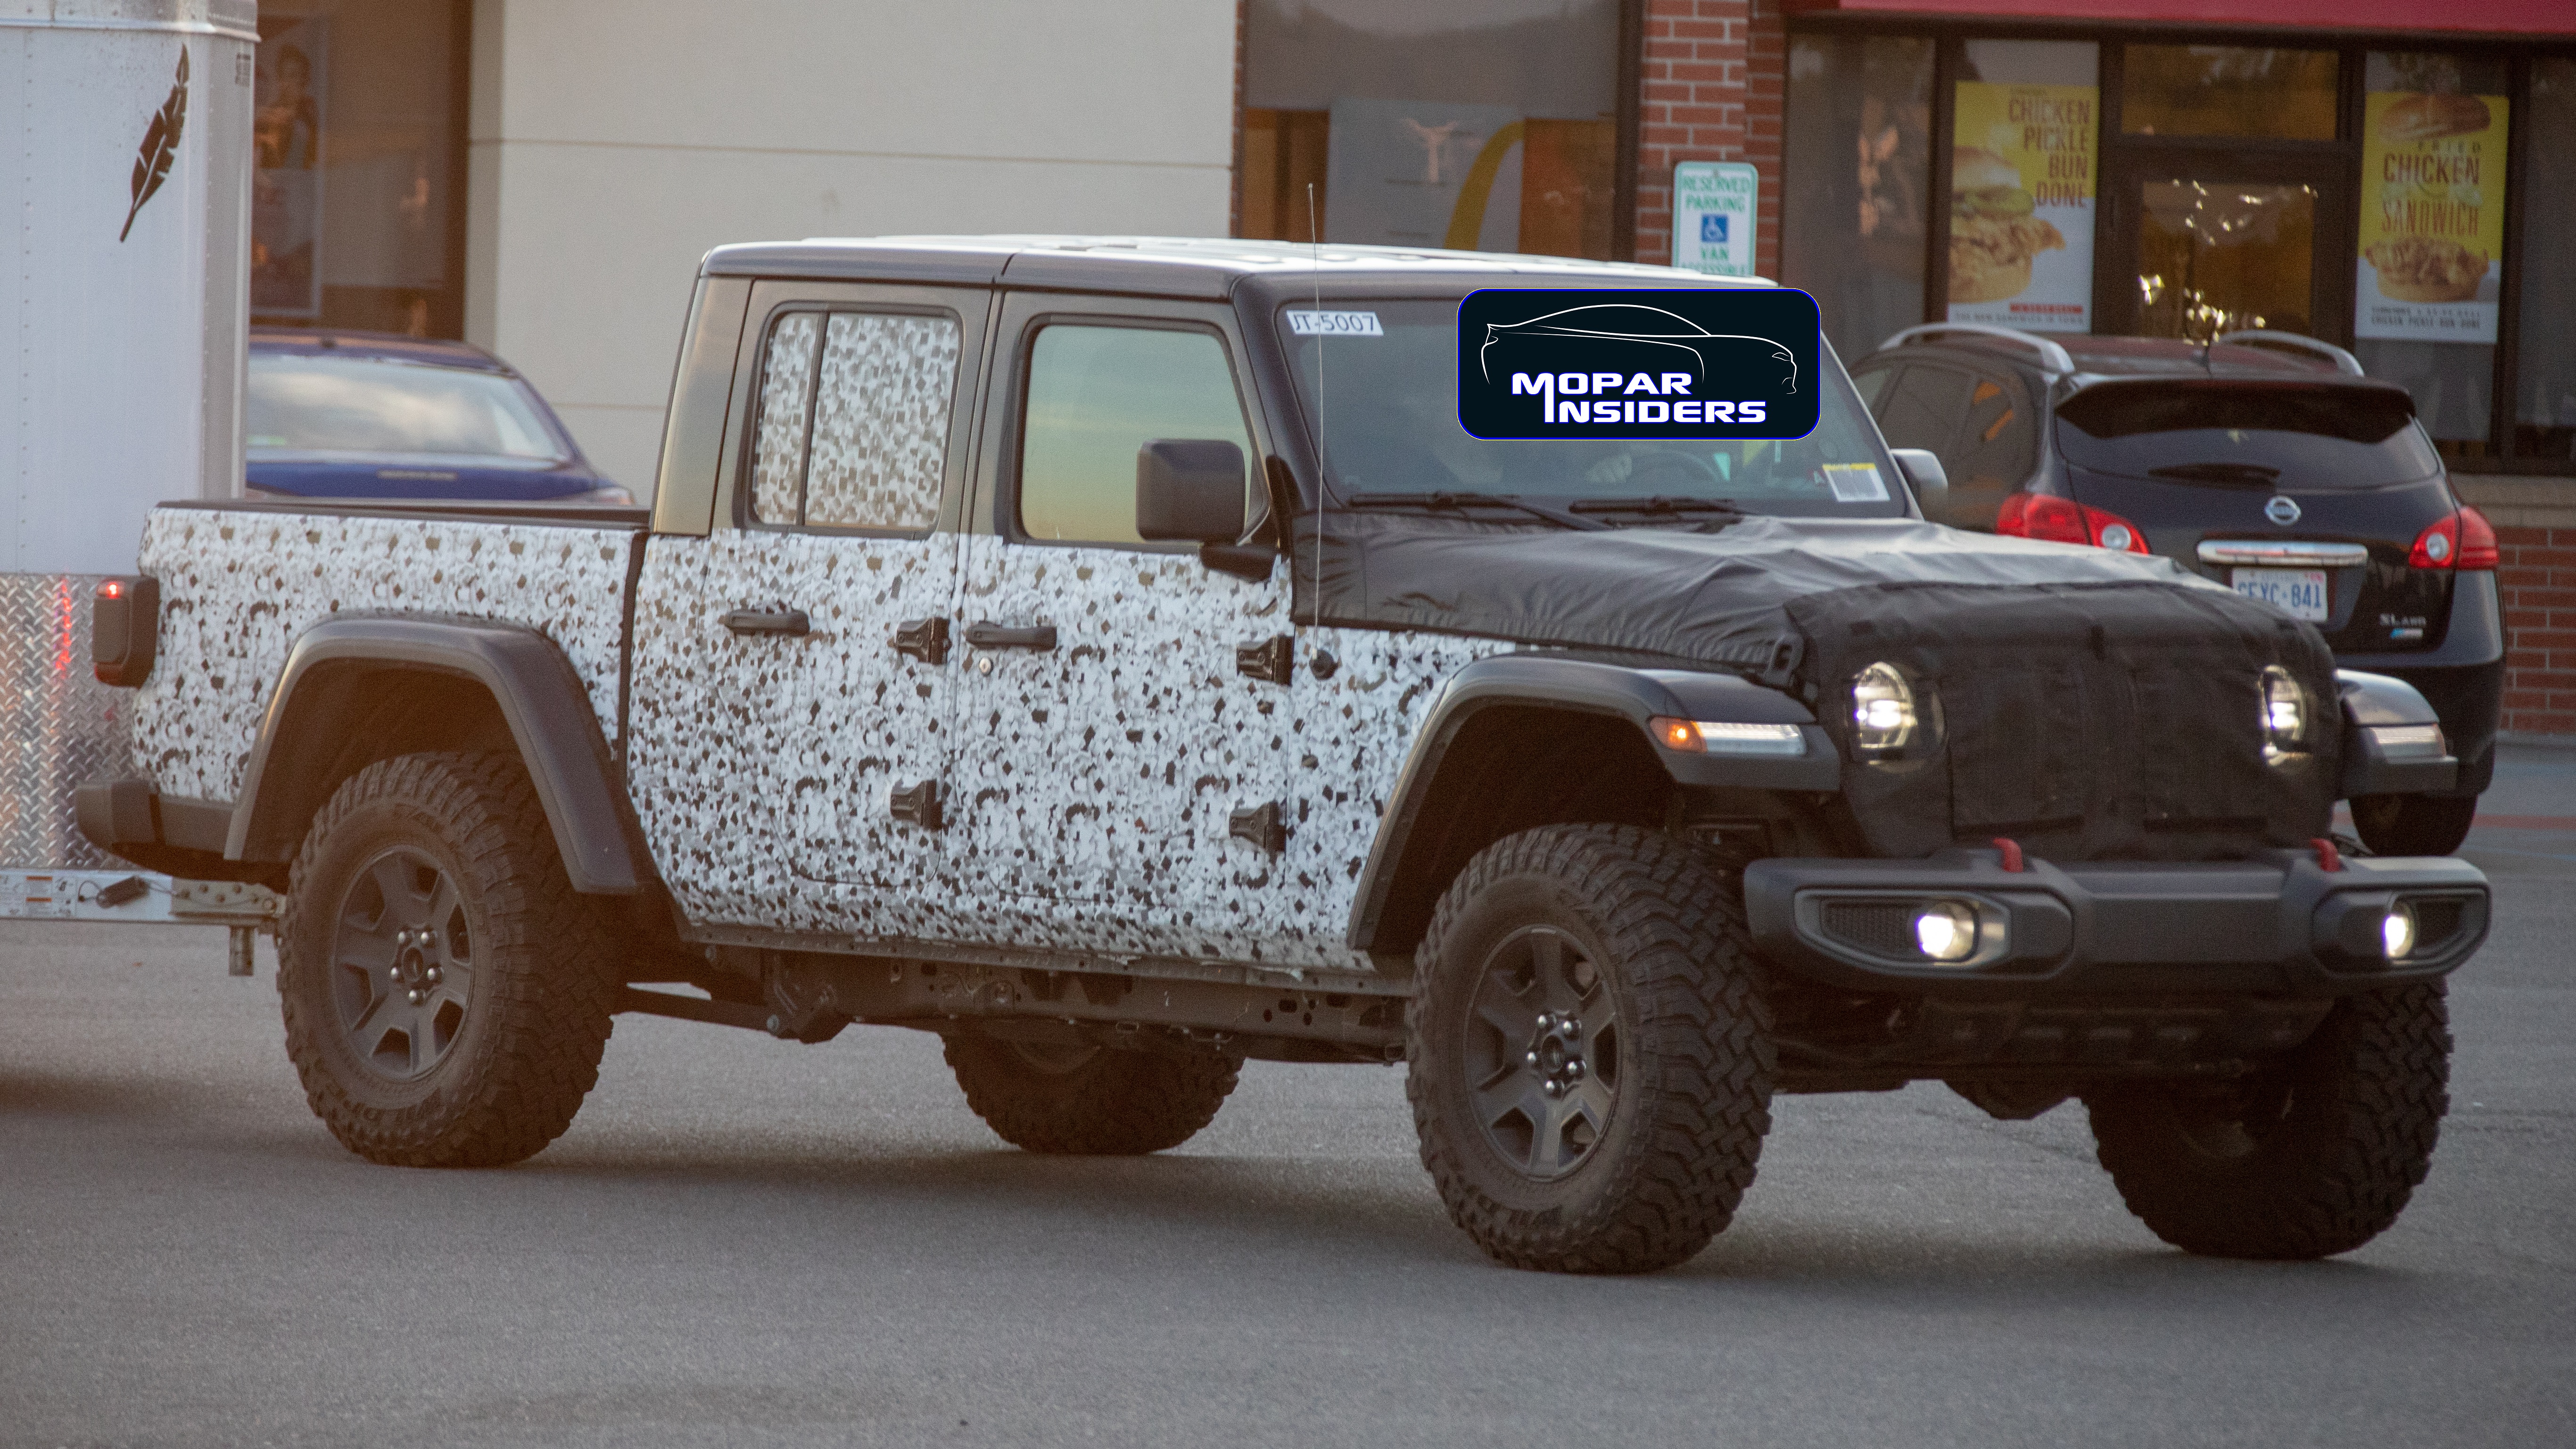 Caught Is Jeep Working On A New Gladiator Hercules Model - new jeep models 2021